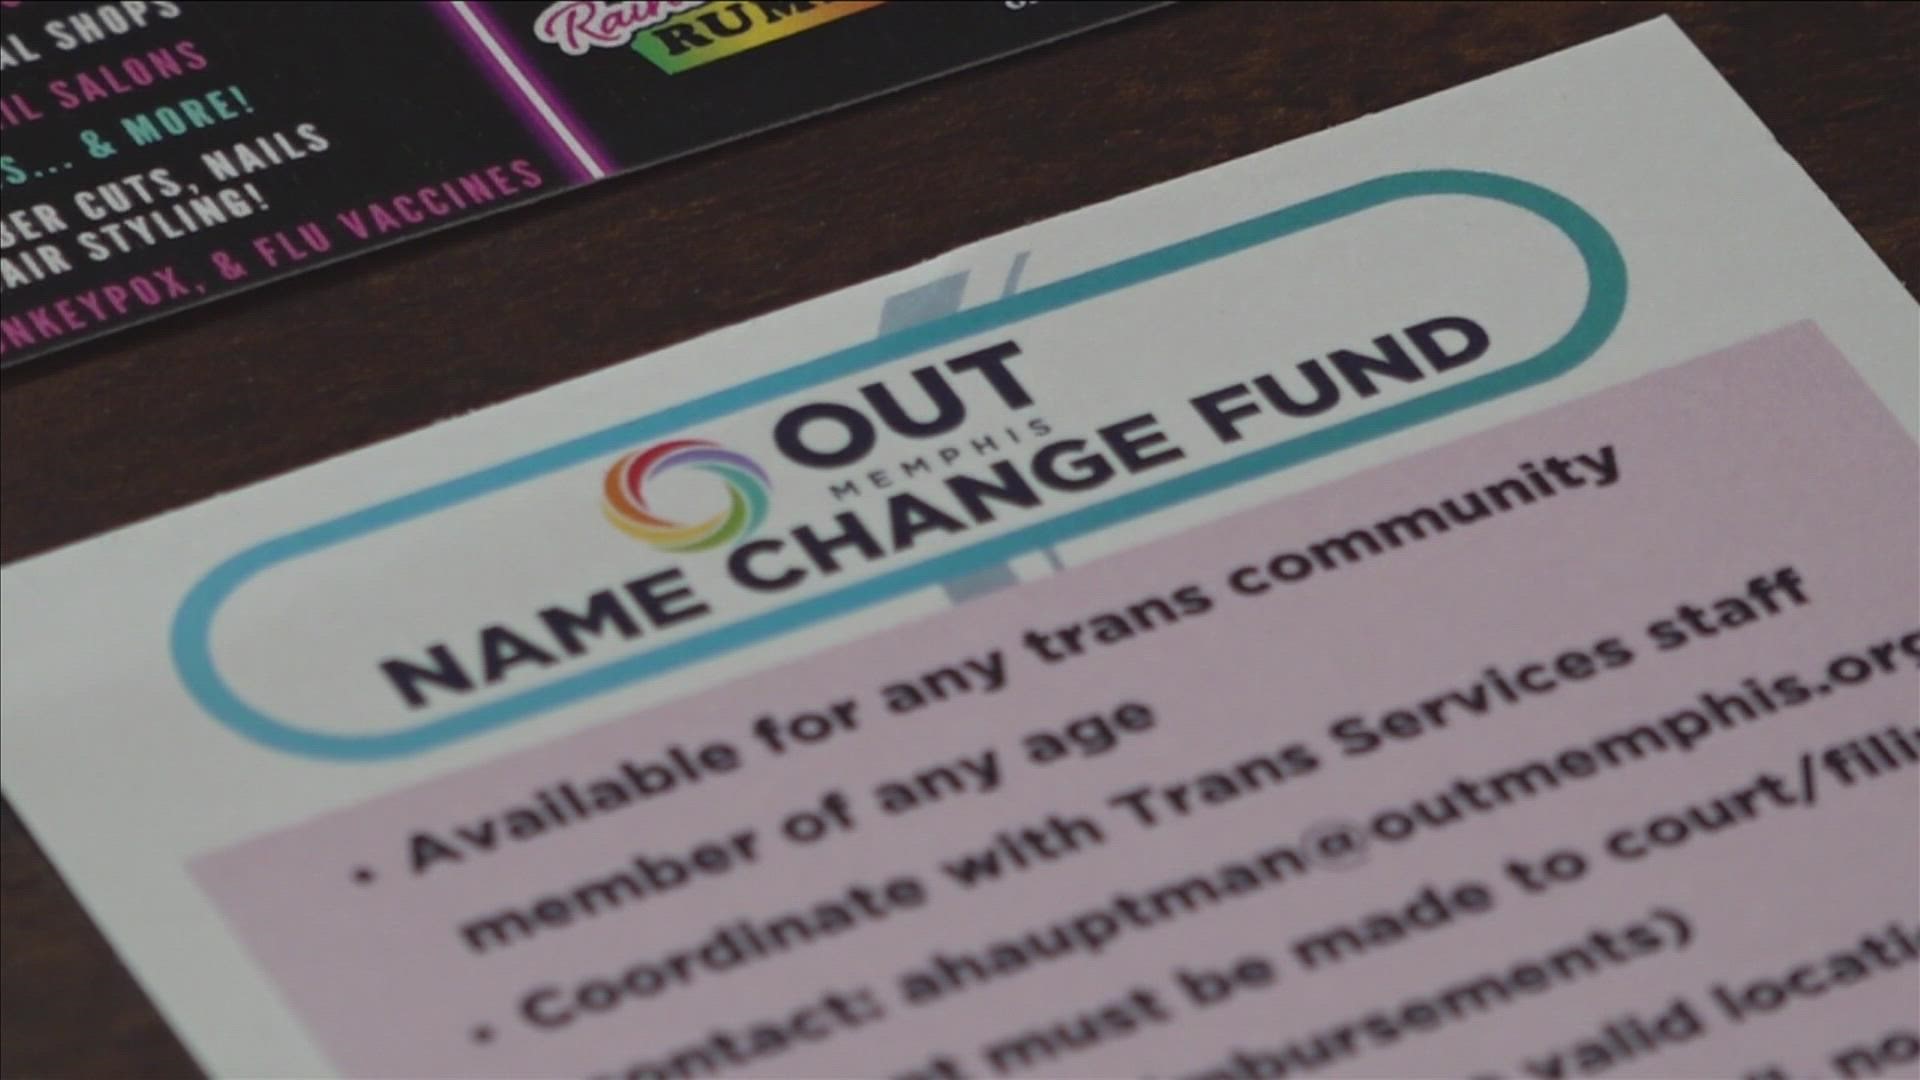 The organization is making those resources safe and accessible by hosting the first Mid-South Transgender Resource Fair Saturday.